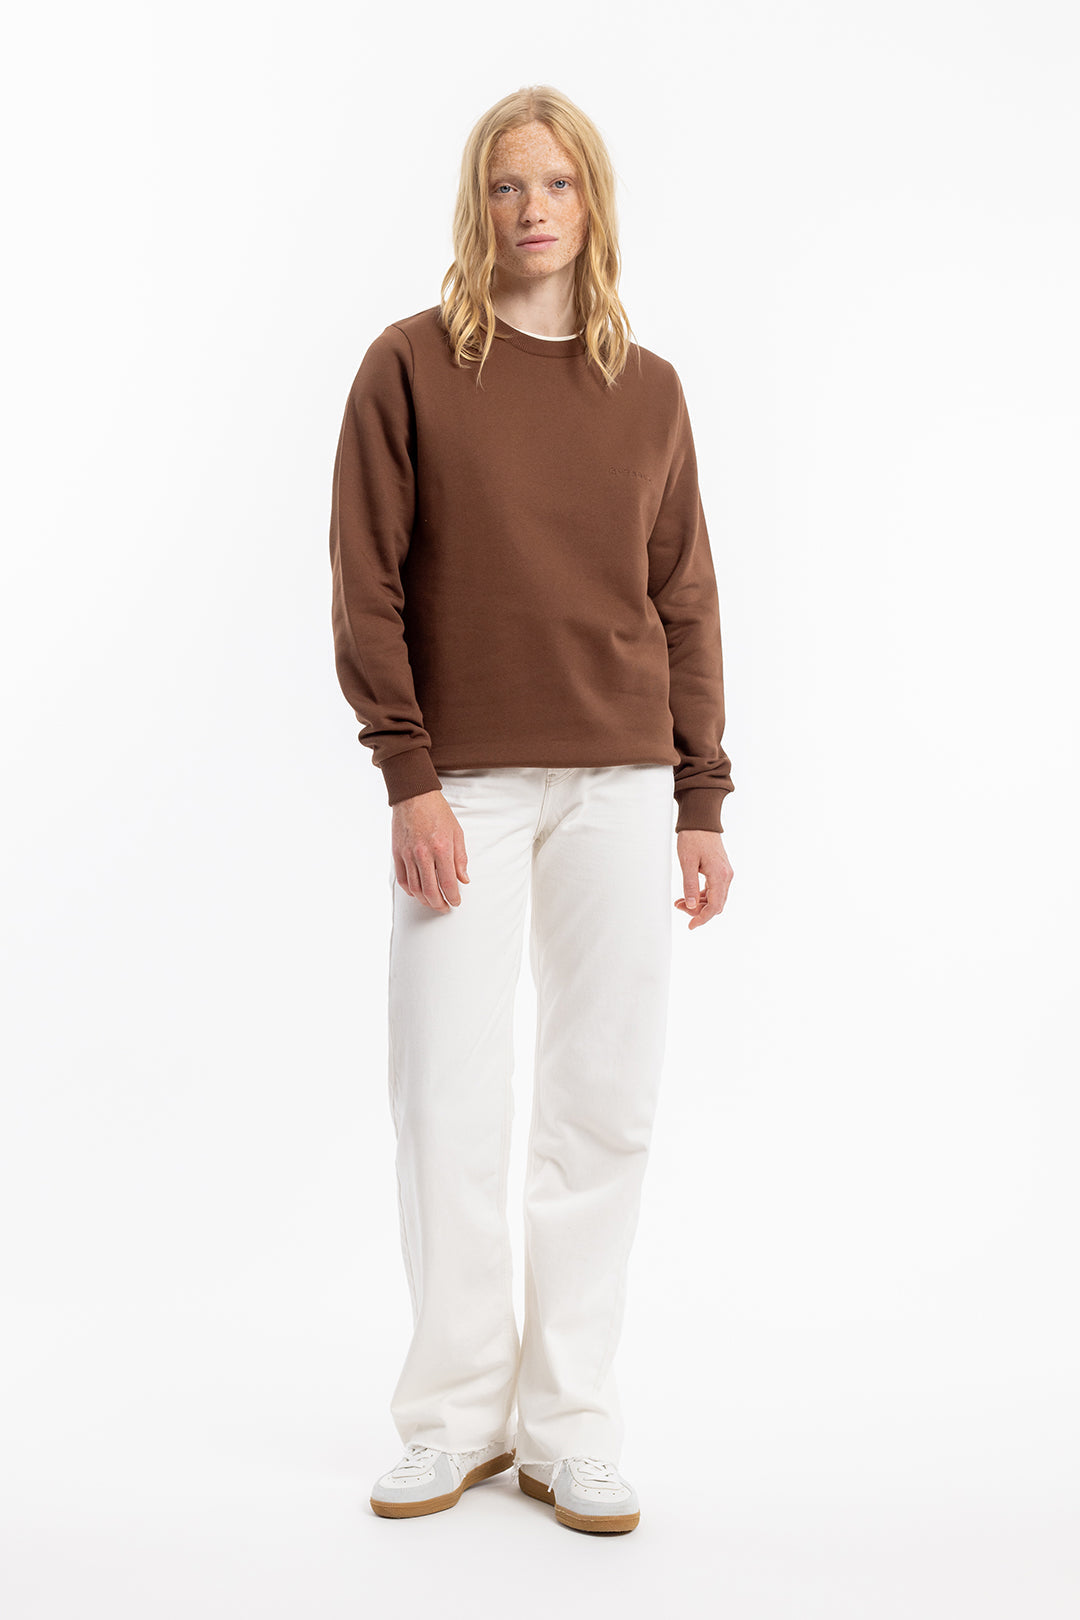 Brown sweater logo made of organic cotton from Rotholz